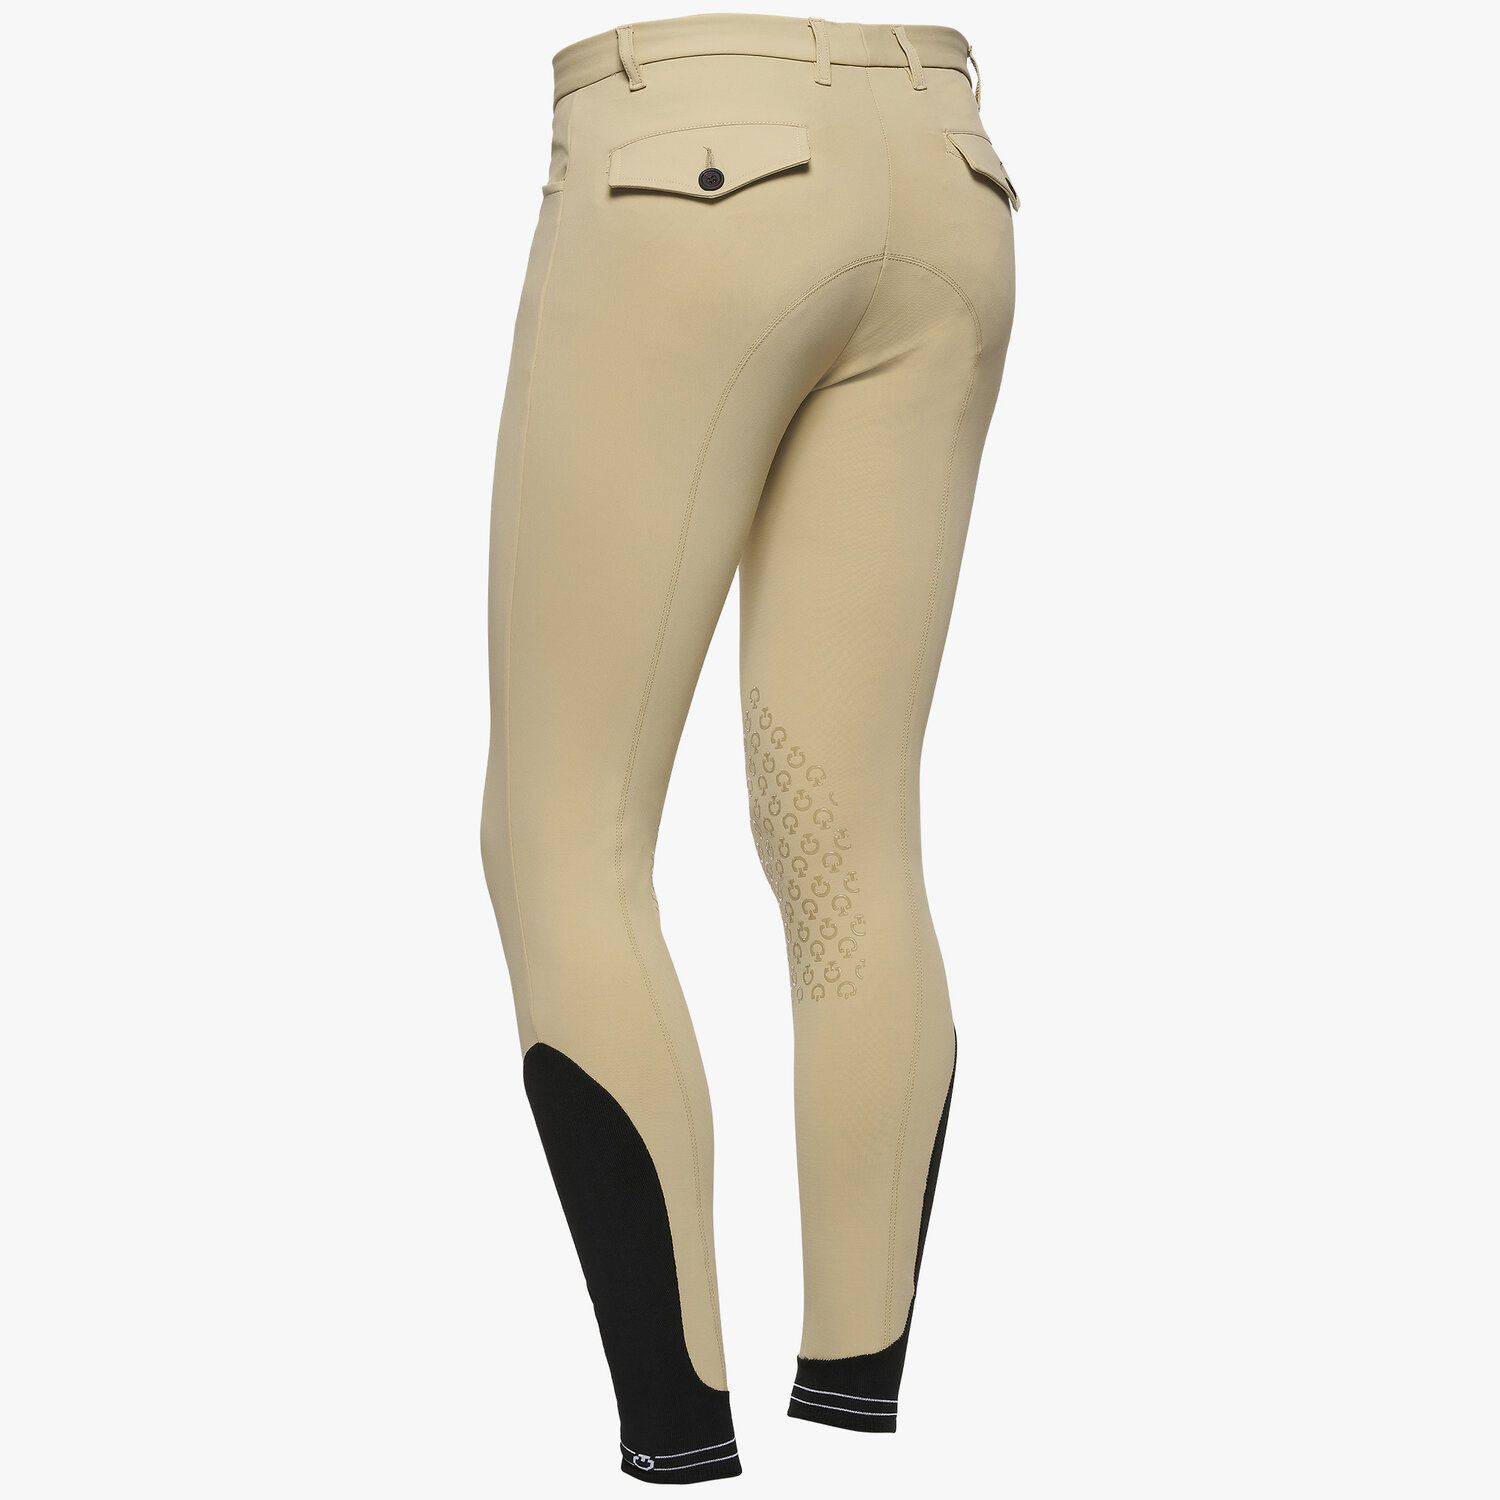 Cavalleria Toscana Men's knee grip breeches with perforated logo tape BEIGE-3